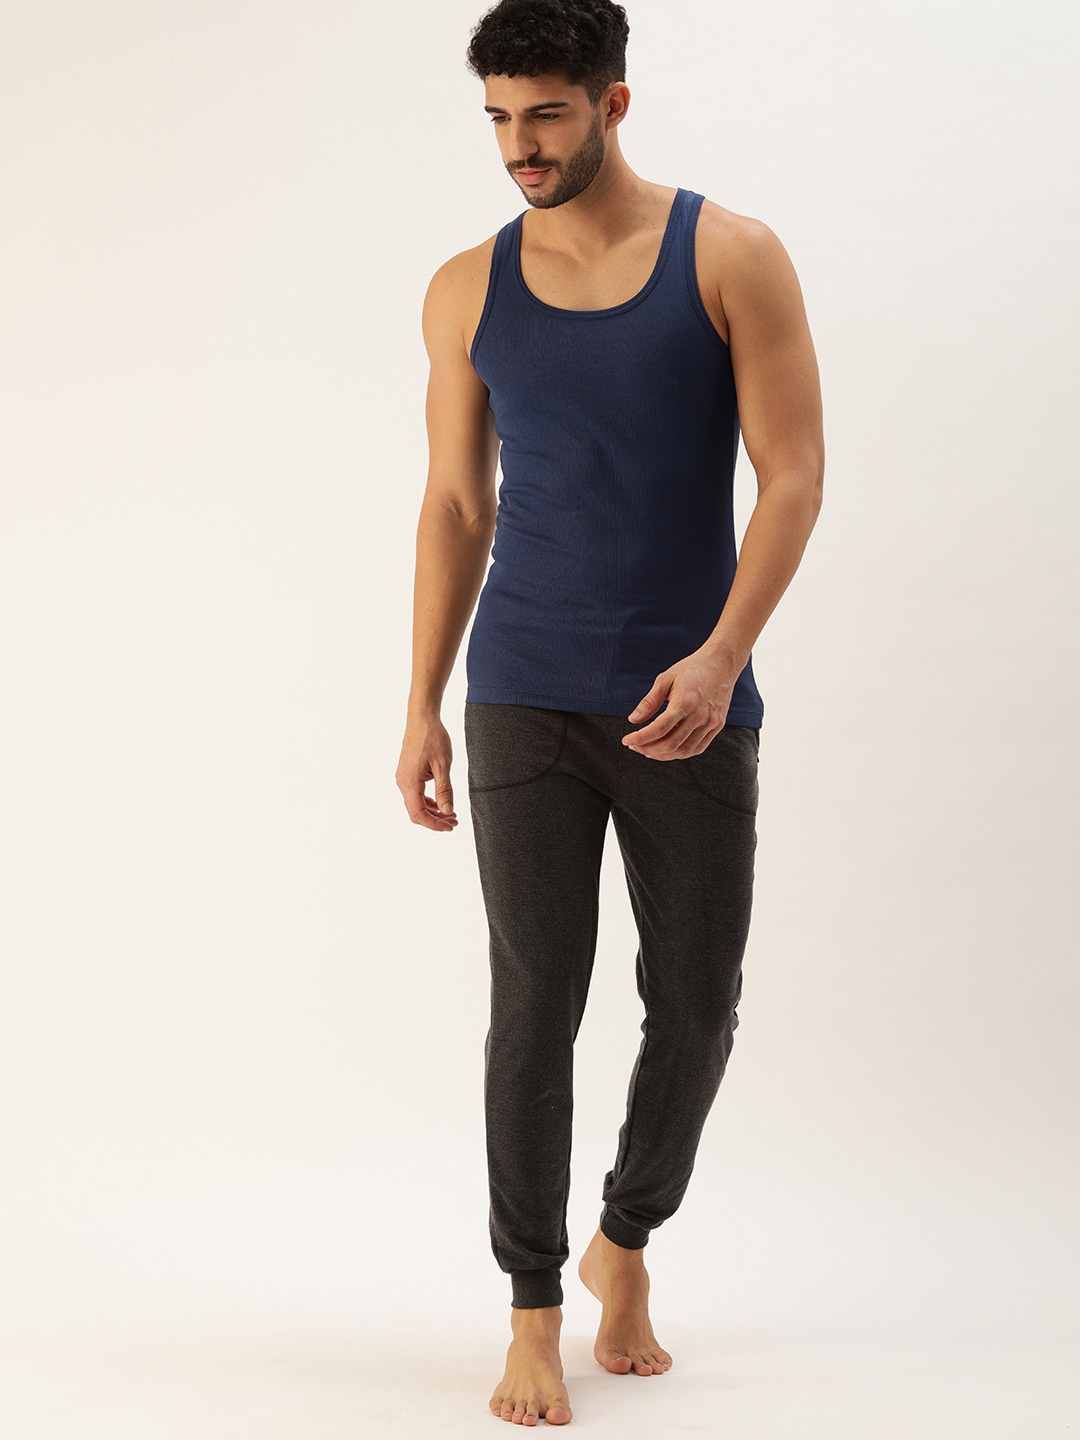 Clothing Innerwear Vests | ether Men Pack Of 2 Navy Blue Ribbed Cotton Innerwear Vests ETHR-RB-PK1-001F - DB04625